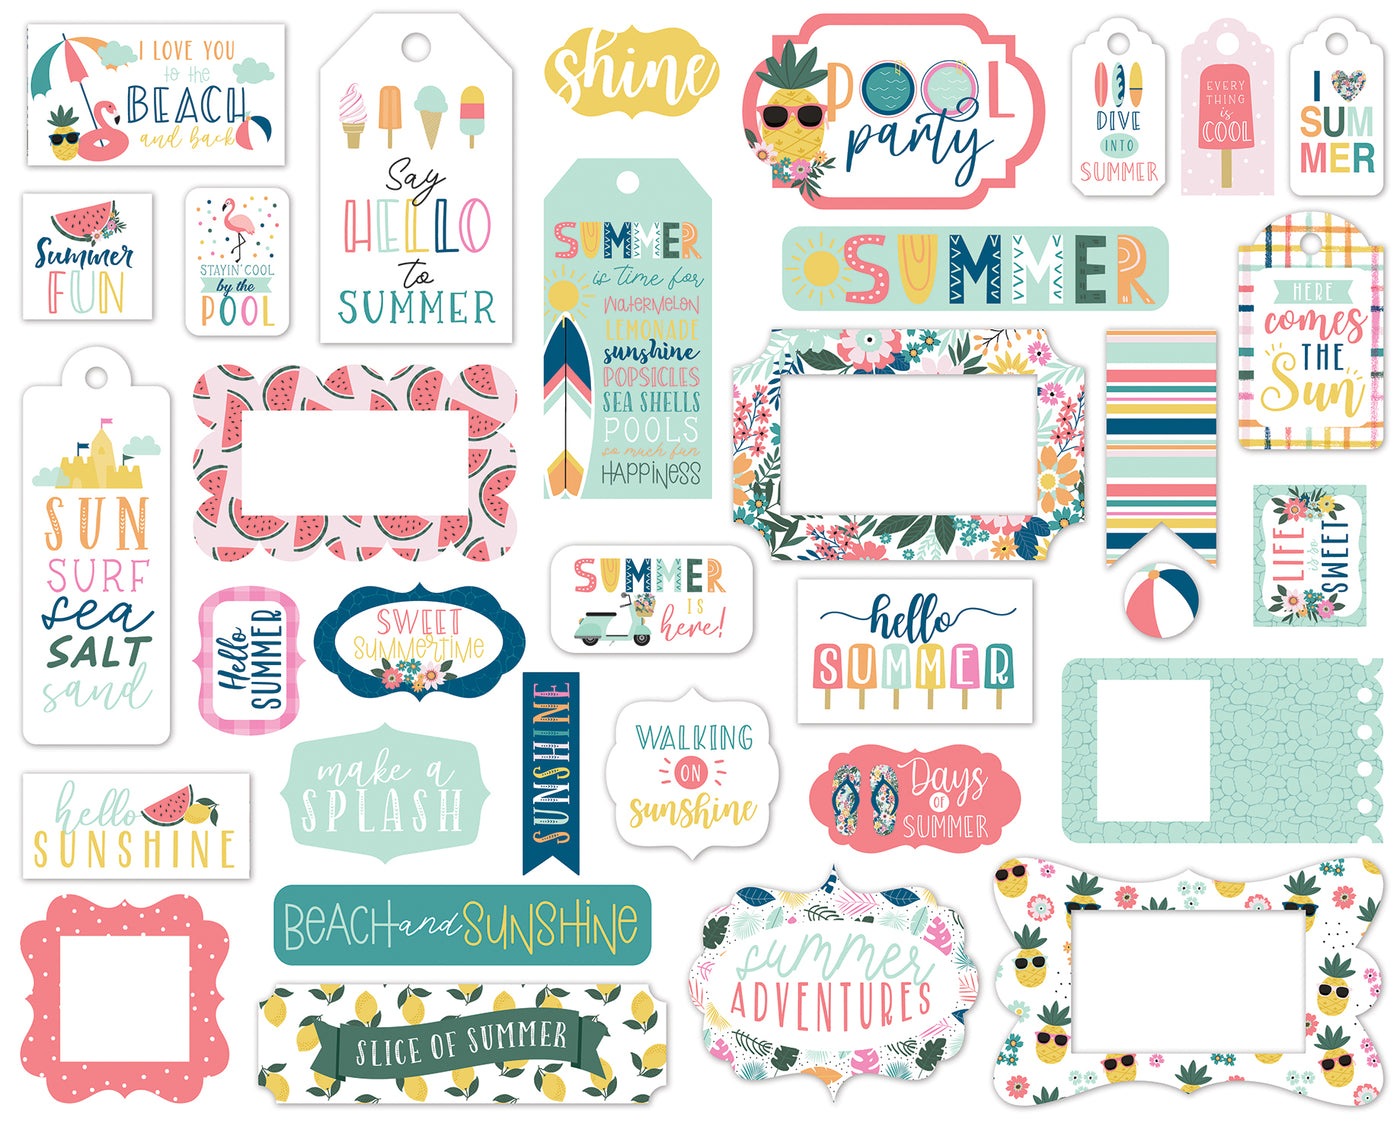 Pool Party Frames and Tags Ephemera Die Cut Cardstock Pack.  Pack includes 33 different die-cut shapes ready to embellish any project.